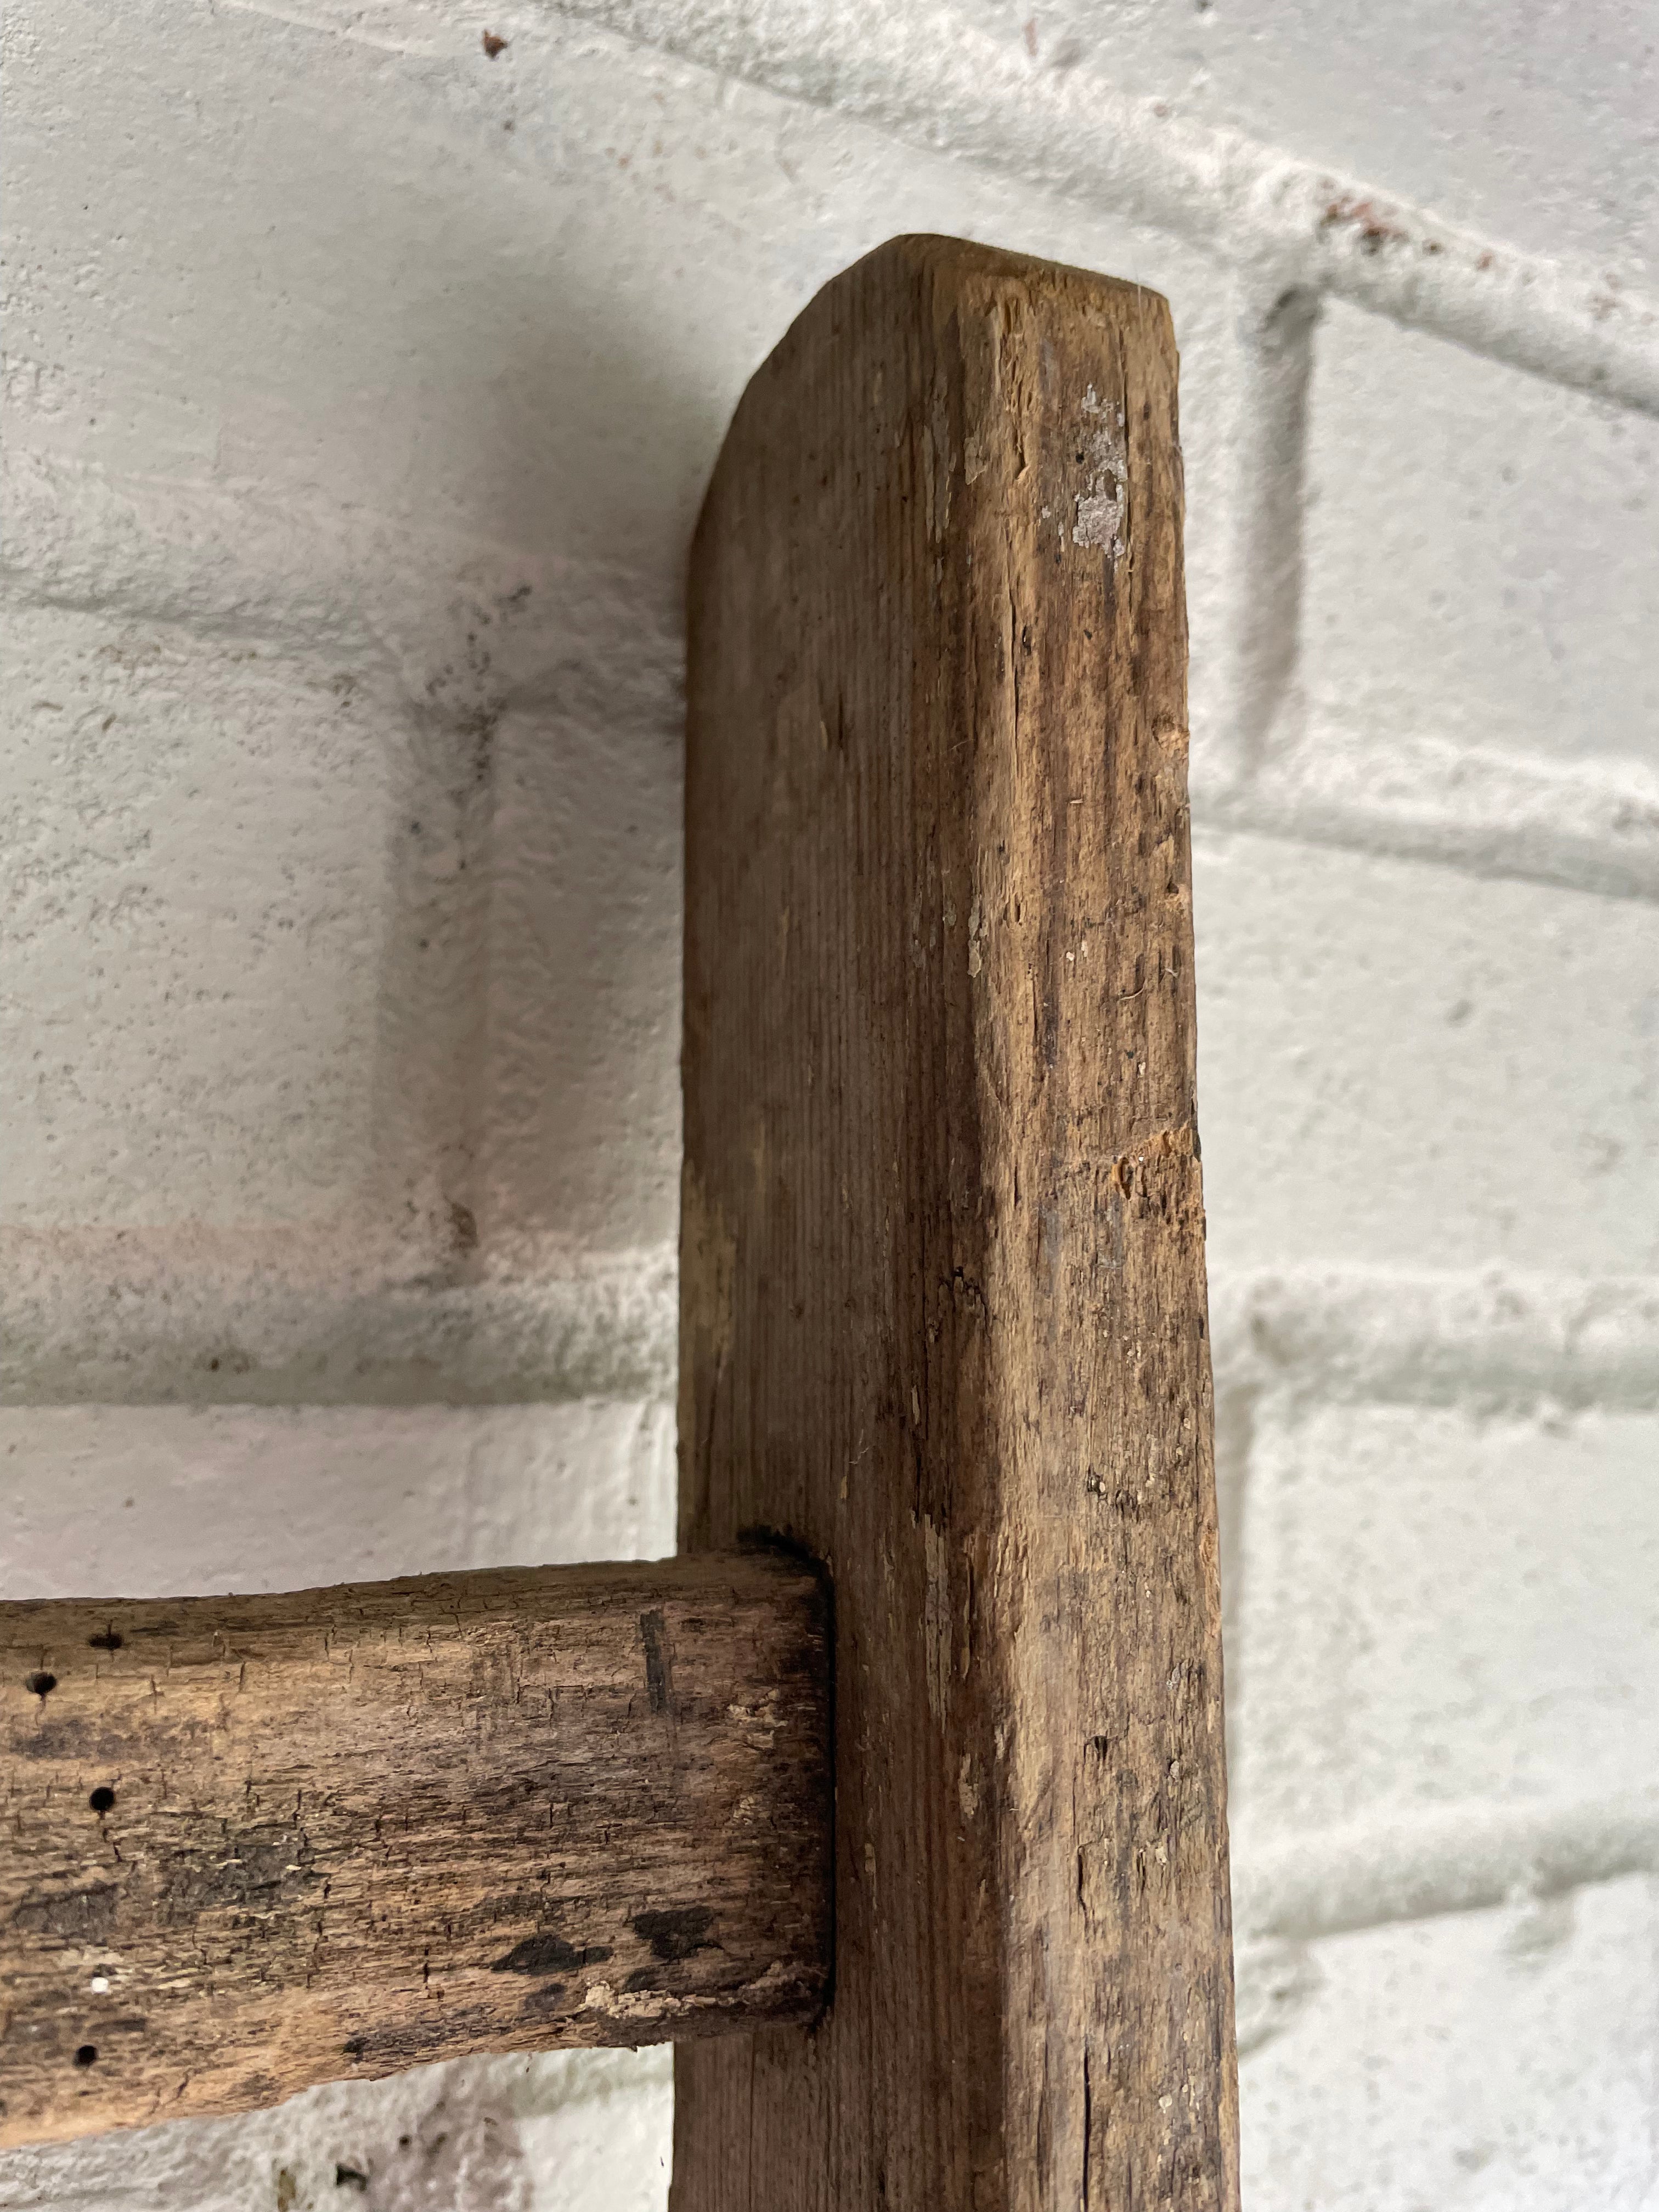 Rustic Wooden Ladder